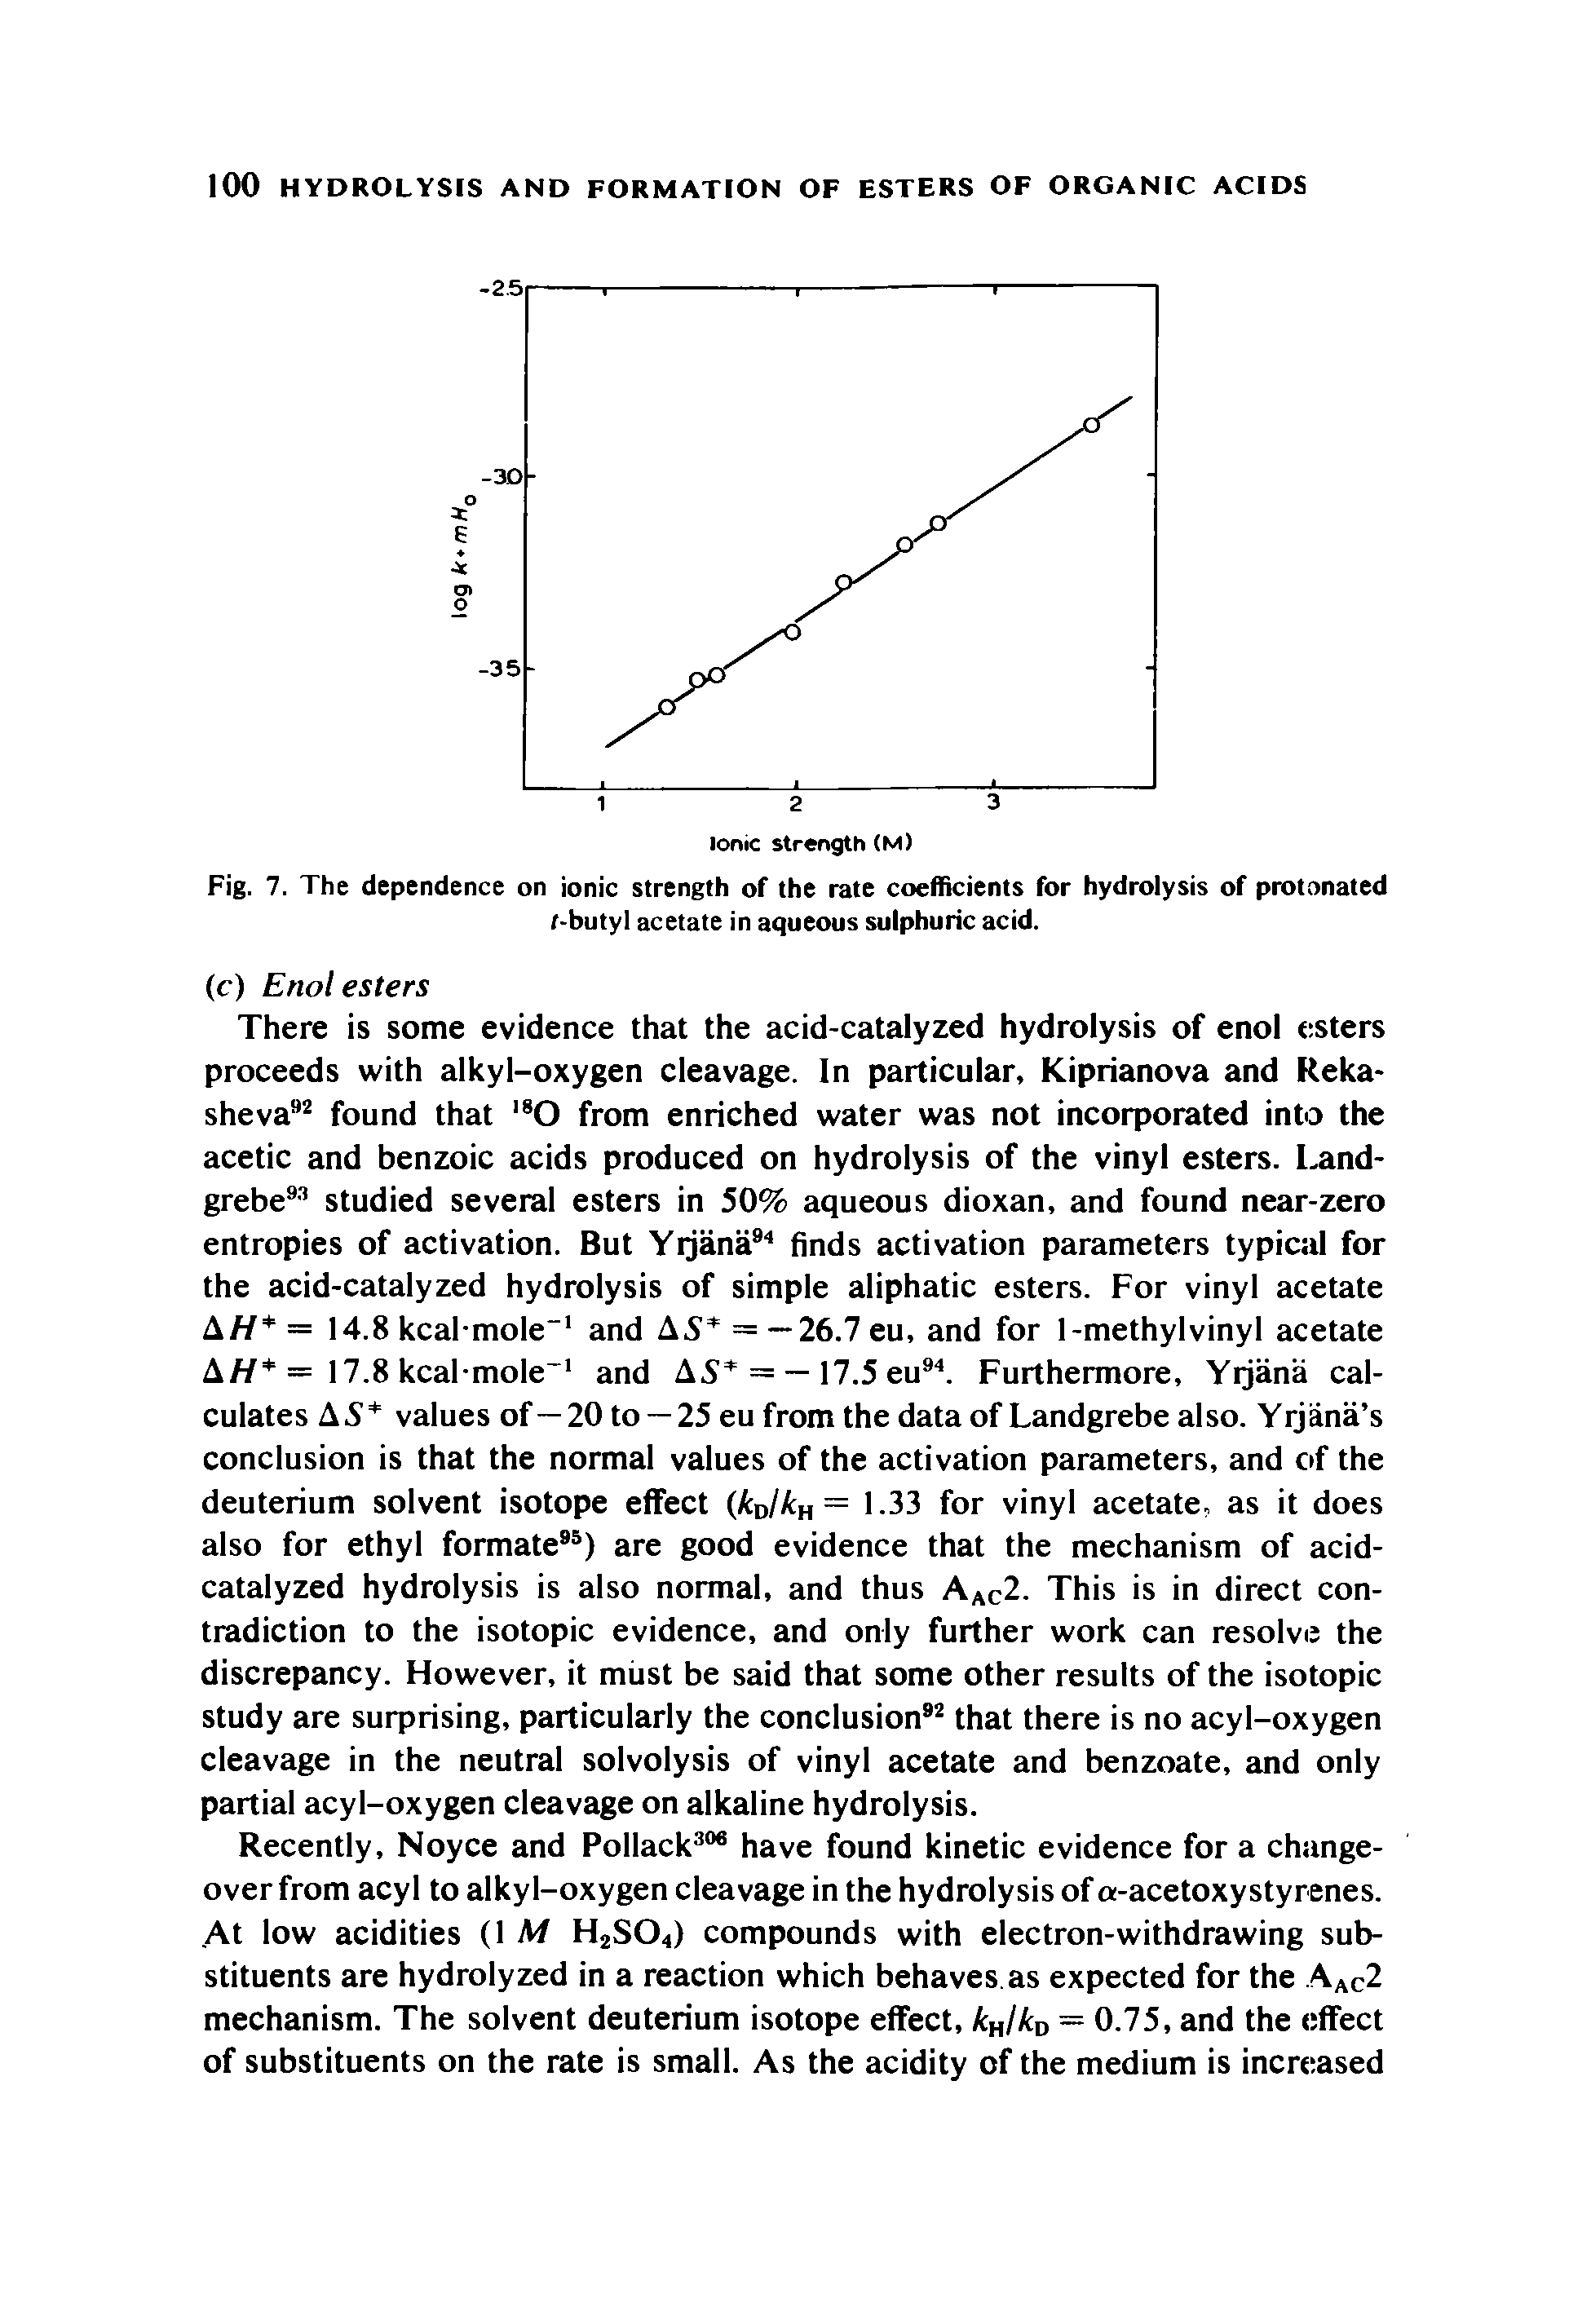 Fig. 7. The dependence on ionic strength of the rate coefficients for hydrolysis of protonated f-butyl acetate in aqueous sulphuric acid.